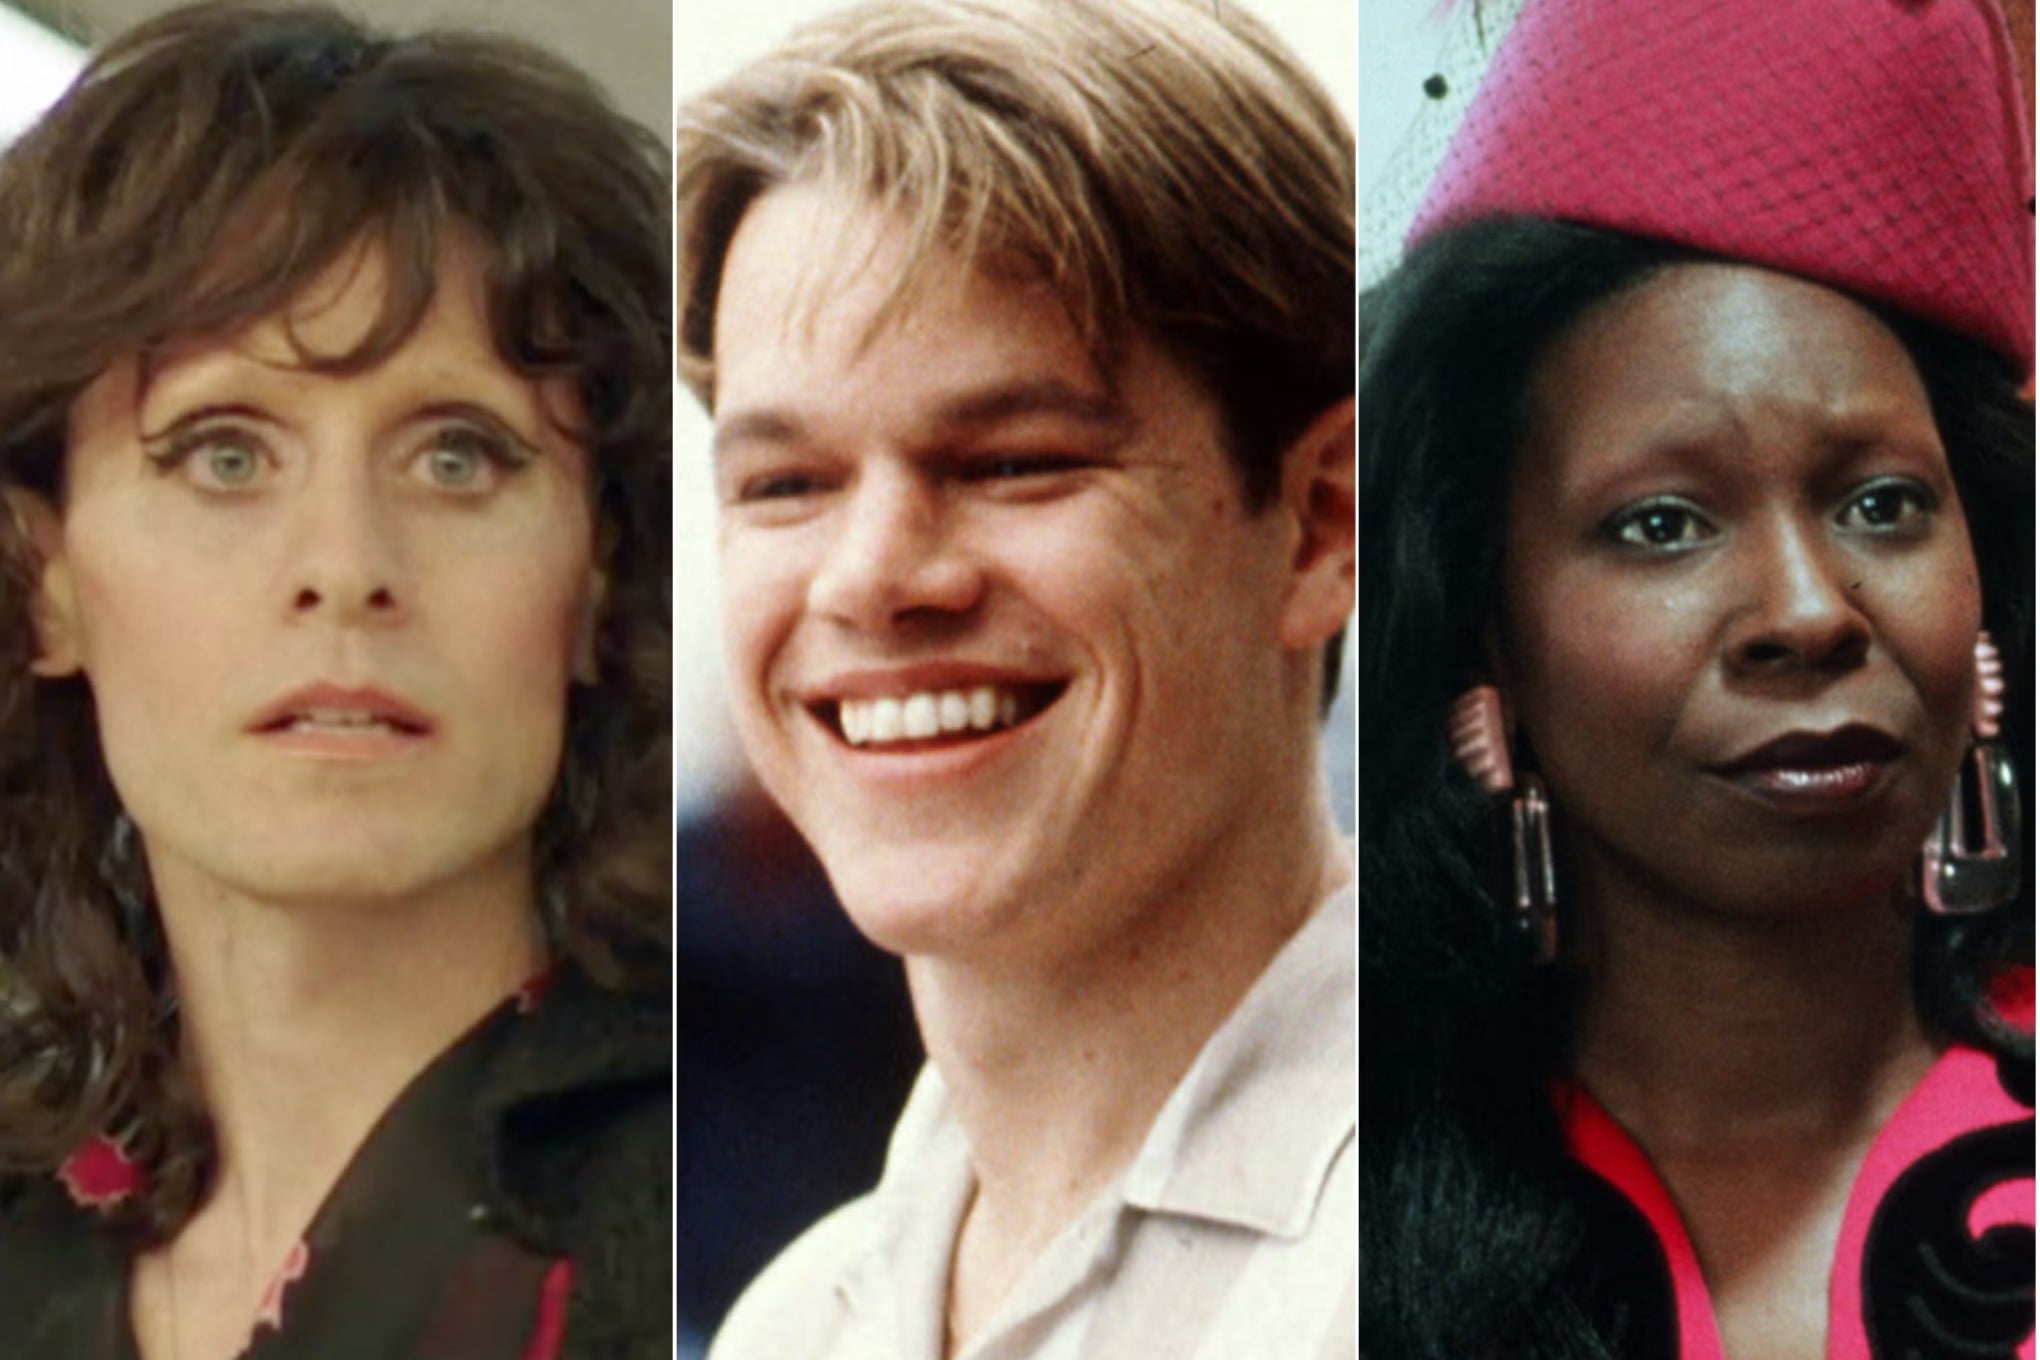 Missing Oscars: Jared Leto in ‘Dallas Buyers Club’, Matt Damon in ‘Good Will Hunting’ and Whoopi Goldberg in ‘Ghost’